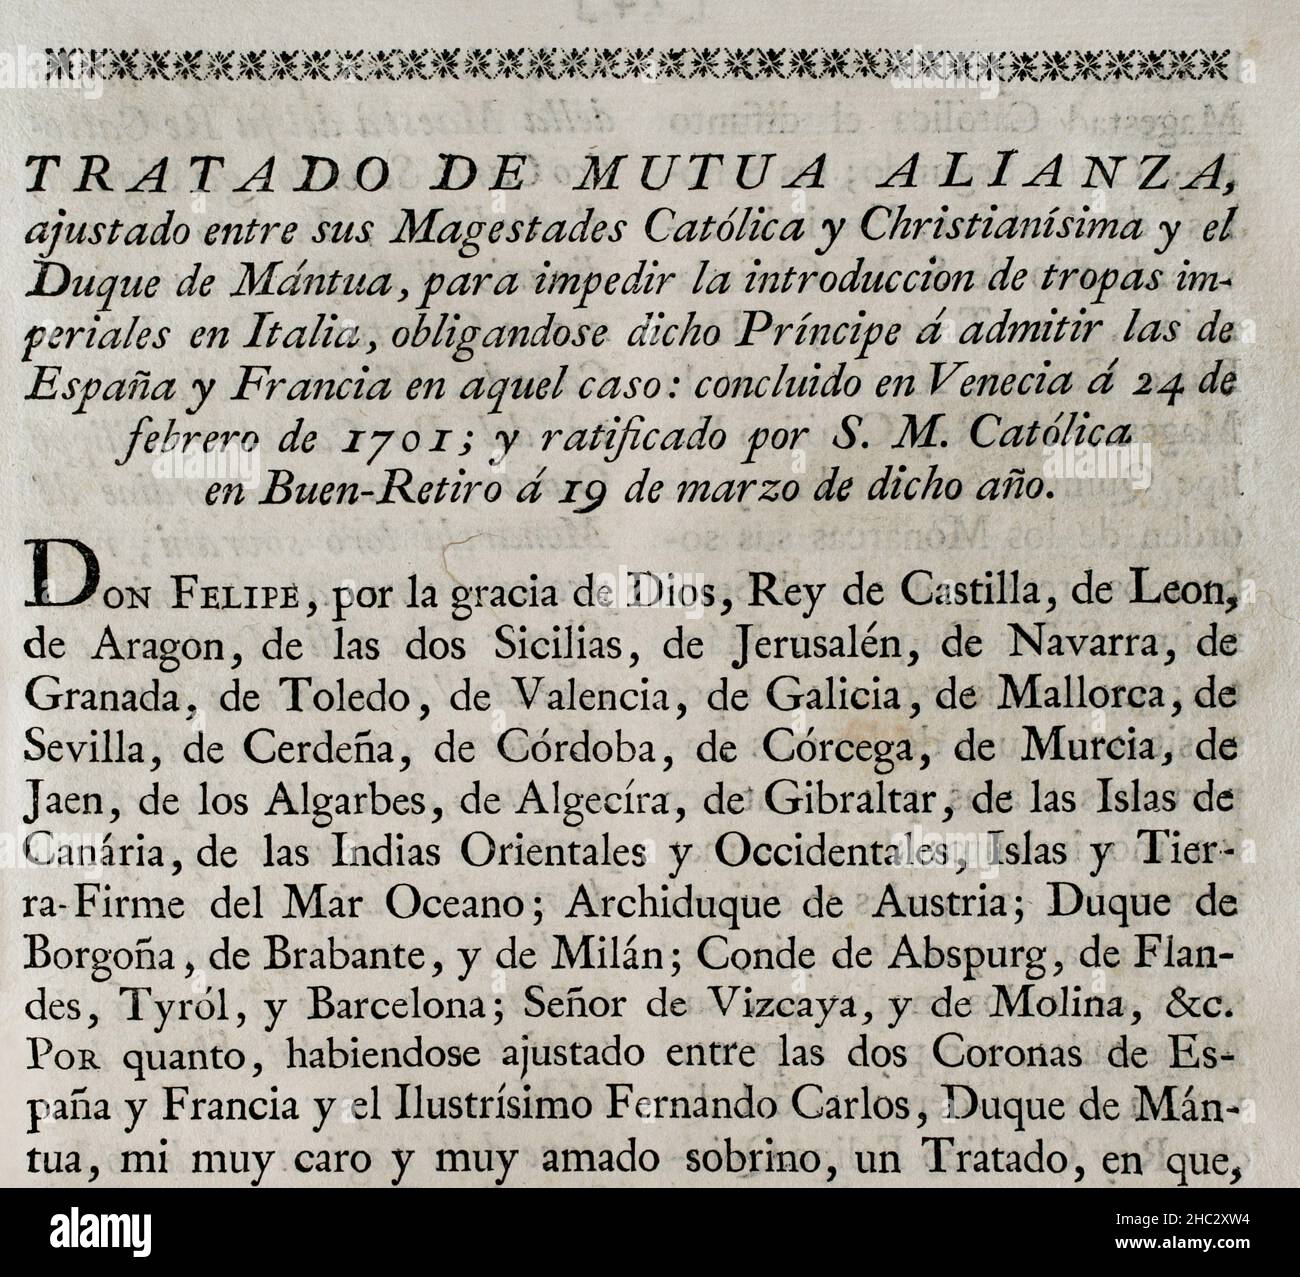 Treaty of Mutual Alliance, agreed between King Philip V of Spain and Ferdinand Charles III of Gonzaga, Duke of Mantua, which forced the duke to admit troops from Spain and France. Concluded in Venice on February 24, 1701 and ratified in Buen-Retiro on March 19 of that year. Collection of the Treaties of Peace, Alliance, Commerce adjusted by the Crown of Spain with the Foreign Powers (Colección de los Tratados de Paz, Alianza, Comercio ajustados por la Corona de España con las Potencias Extranjeras). Volume I. Madrid, 1796. Historical Military Library of Barcelona, Catalonia, Spain. Stock Photo